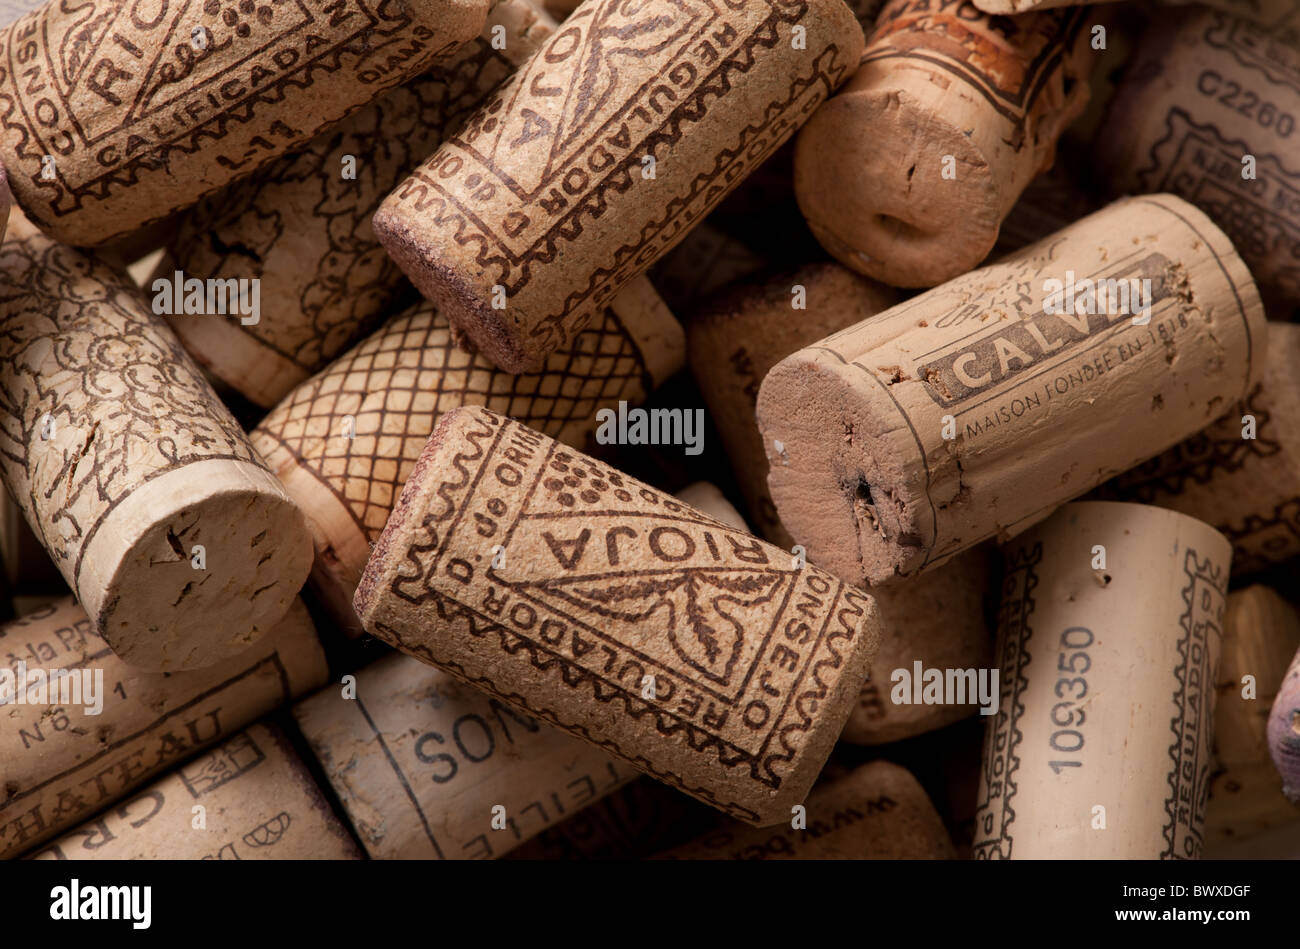 A collection of used wine corks Stock Photo